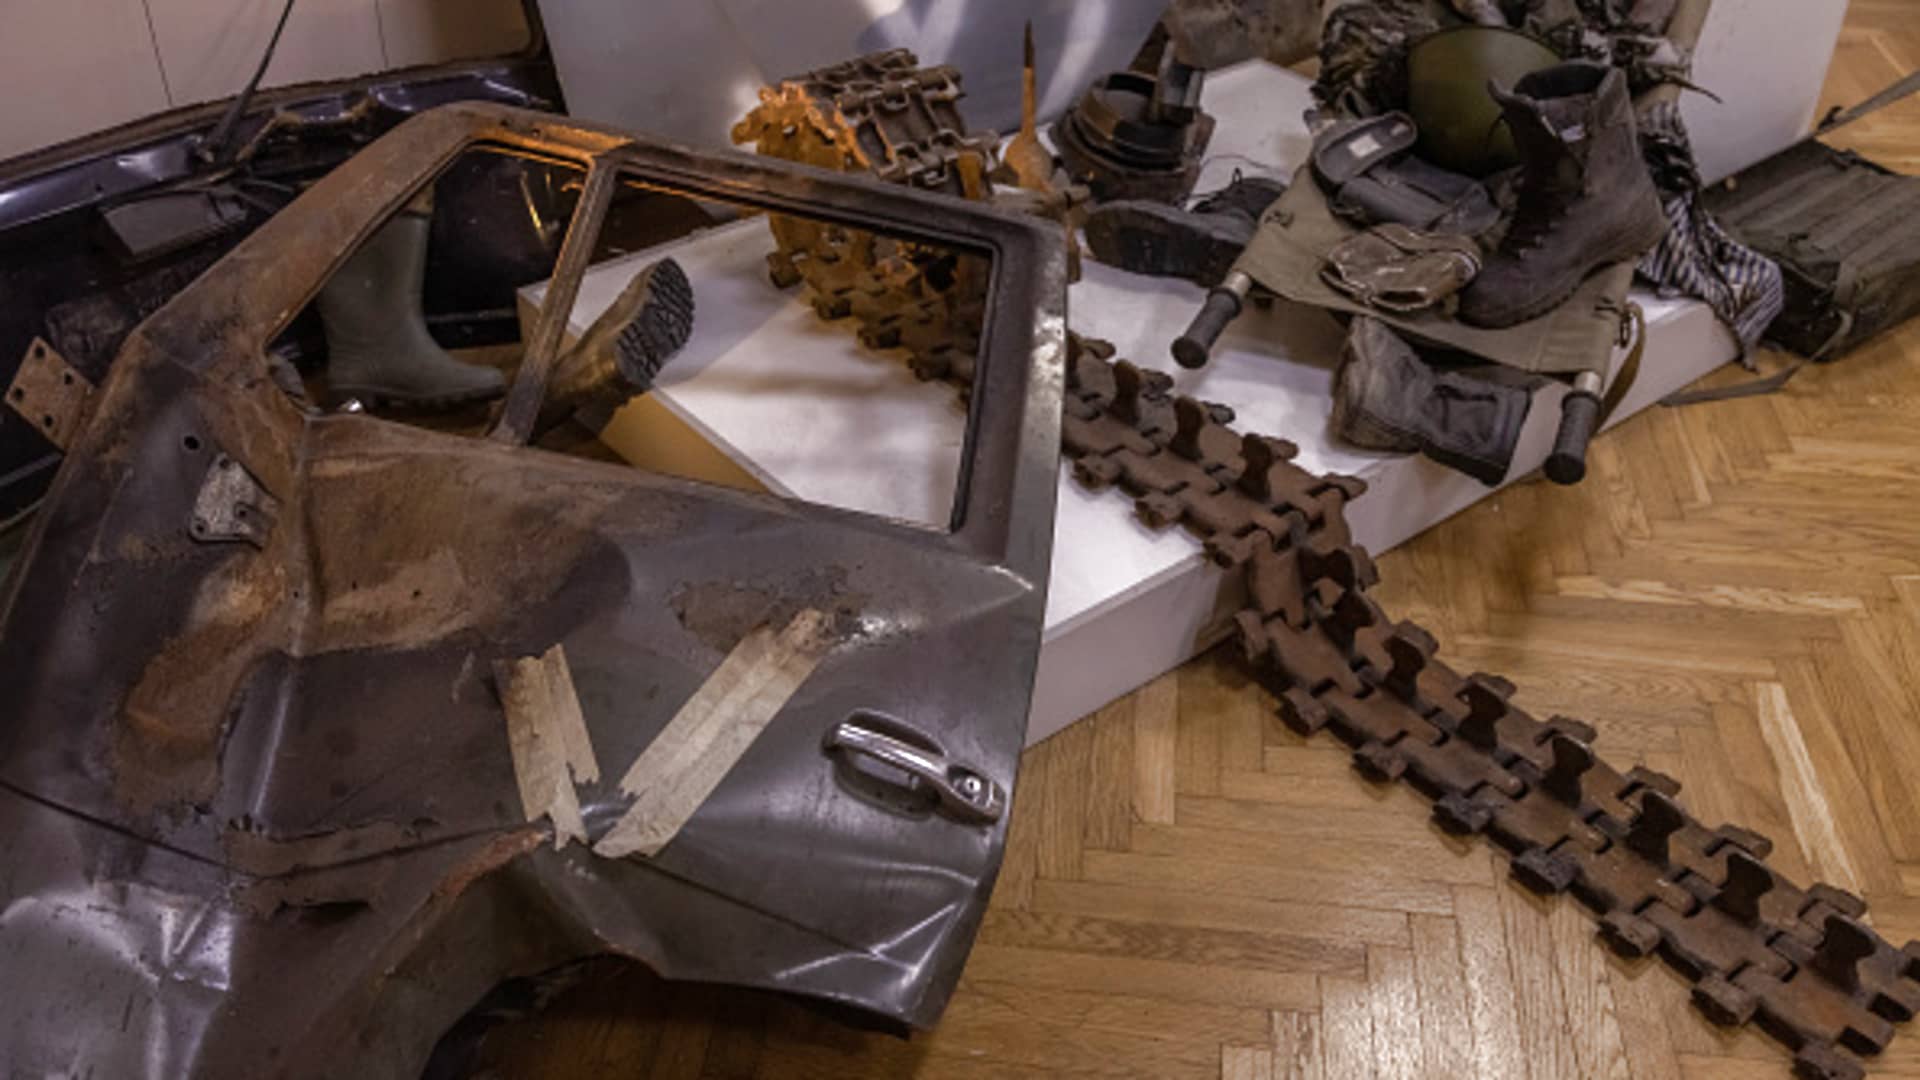 Exhibited parts of military vehicles and items of the Russian army on April 26, 2023 at the National Museum of the History of Ukraine in Kyiv, Ukraine.